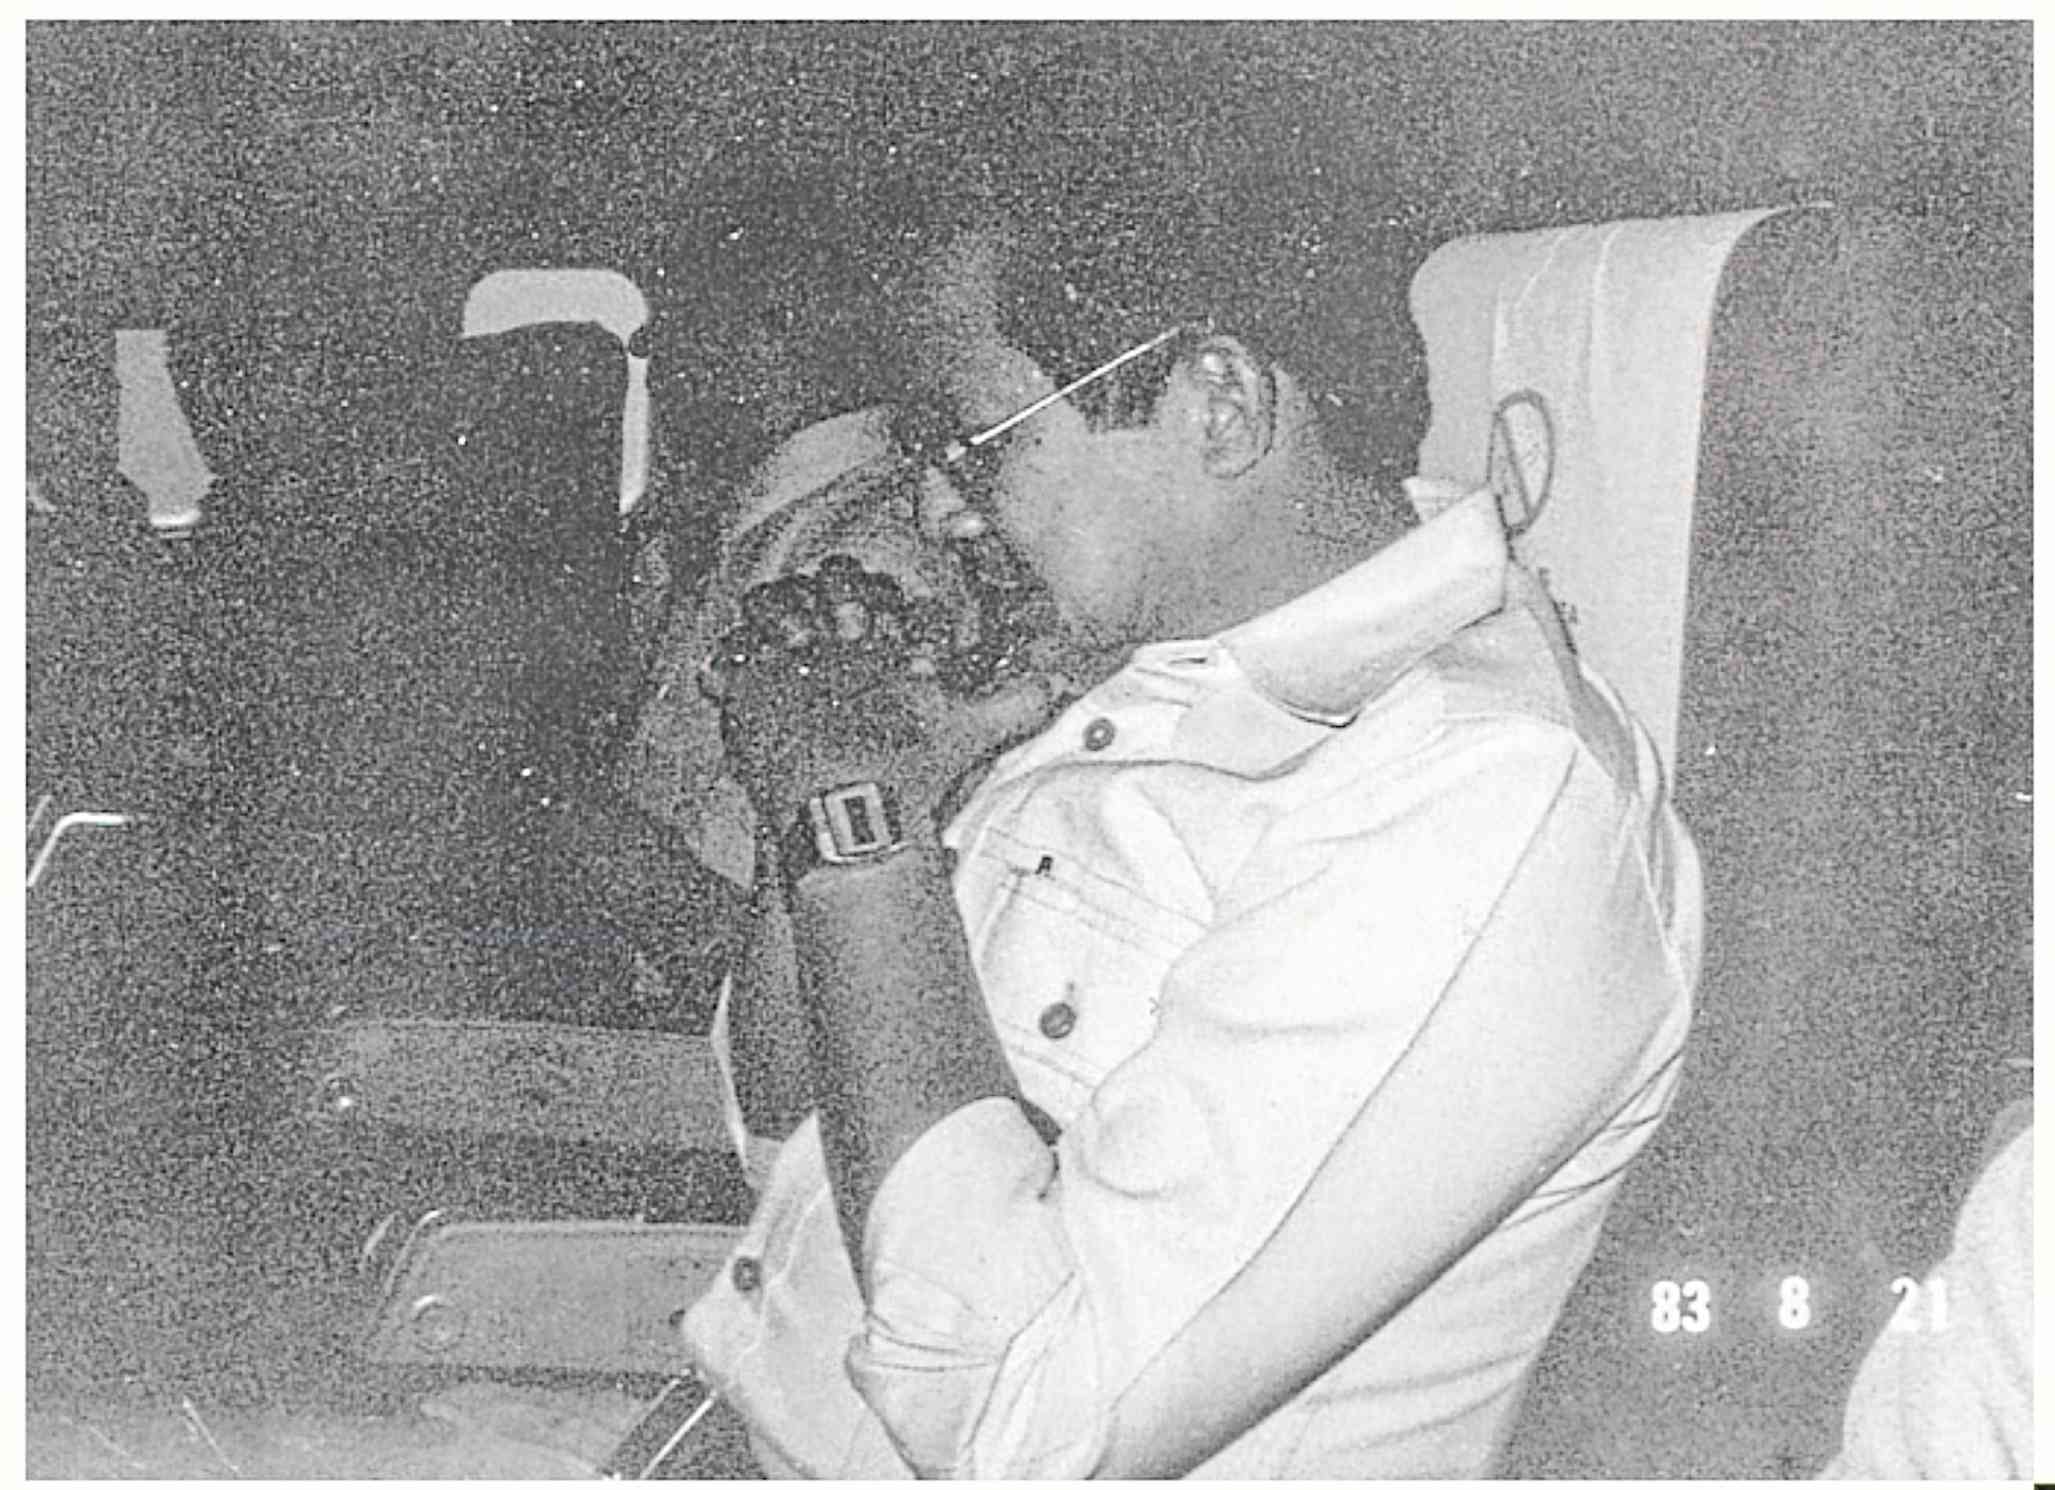 Ninoy praying the rosary in his airplane seat on Aug. 21, 1983.